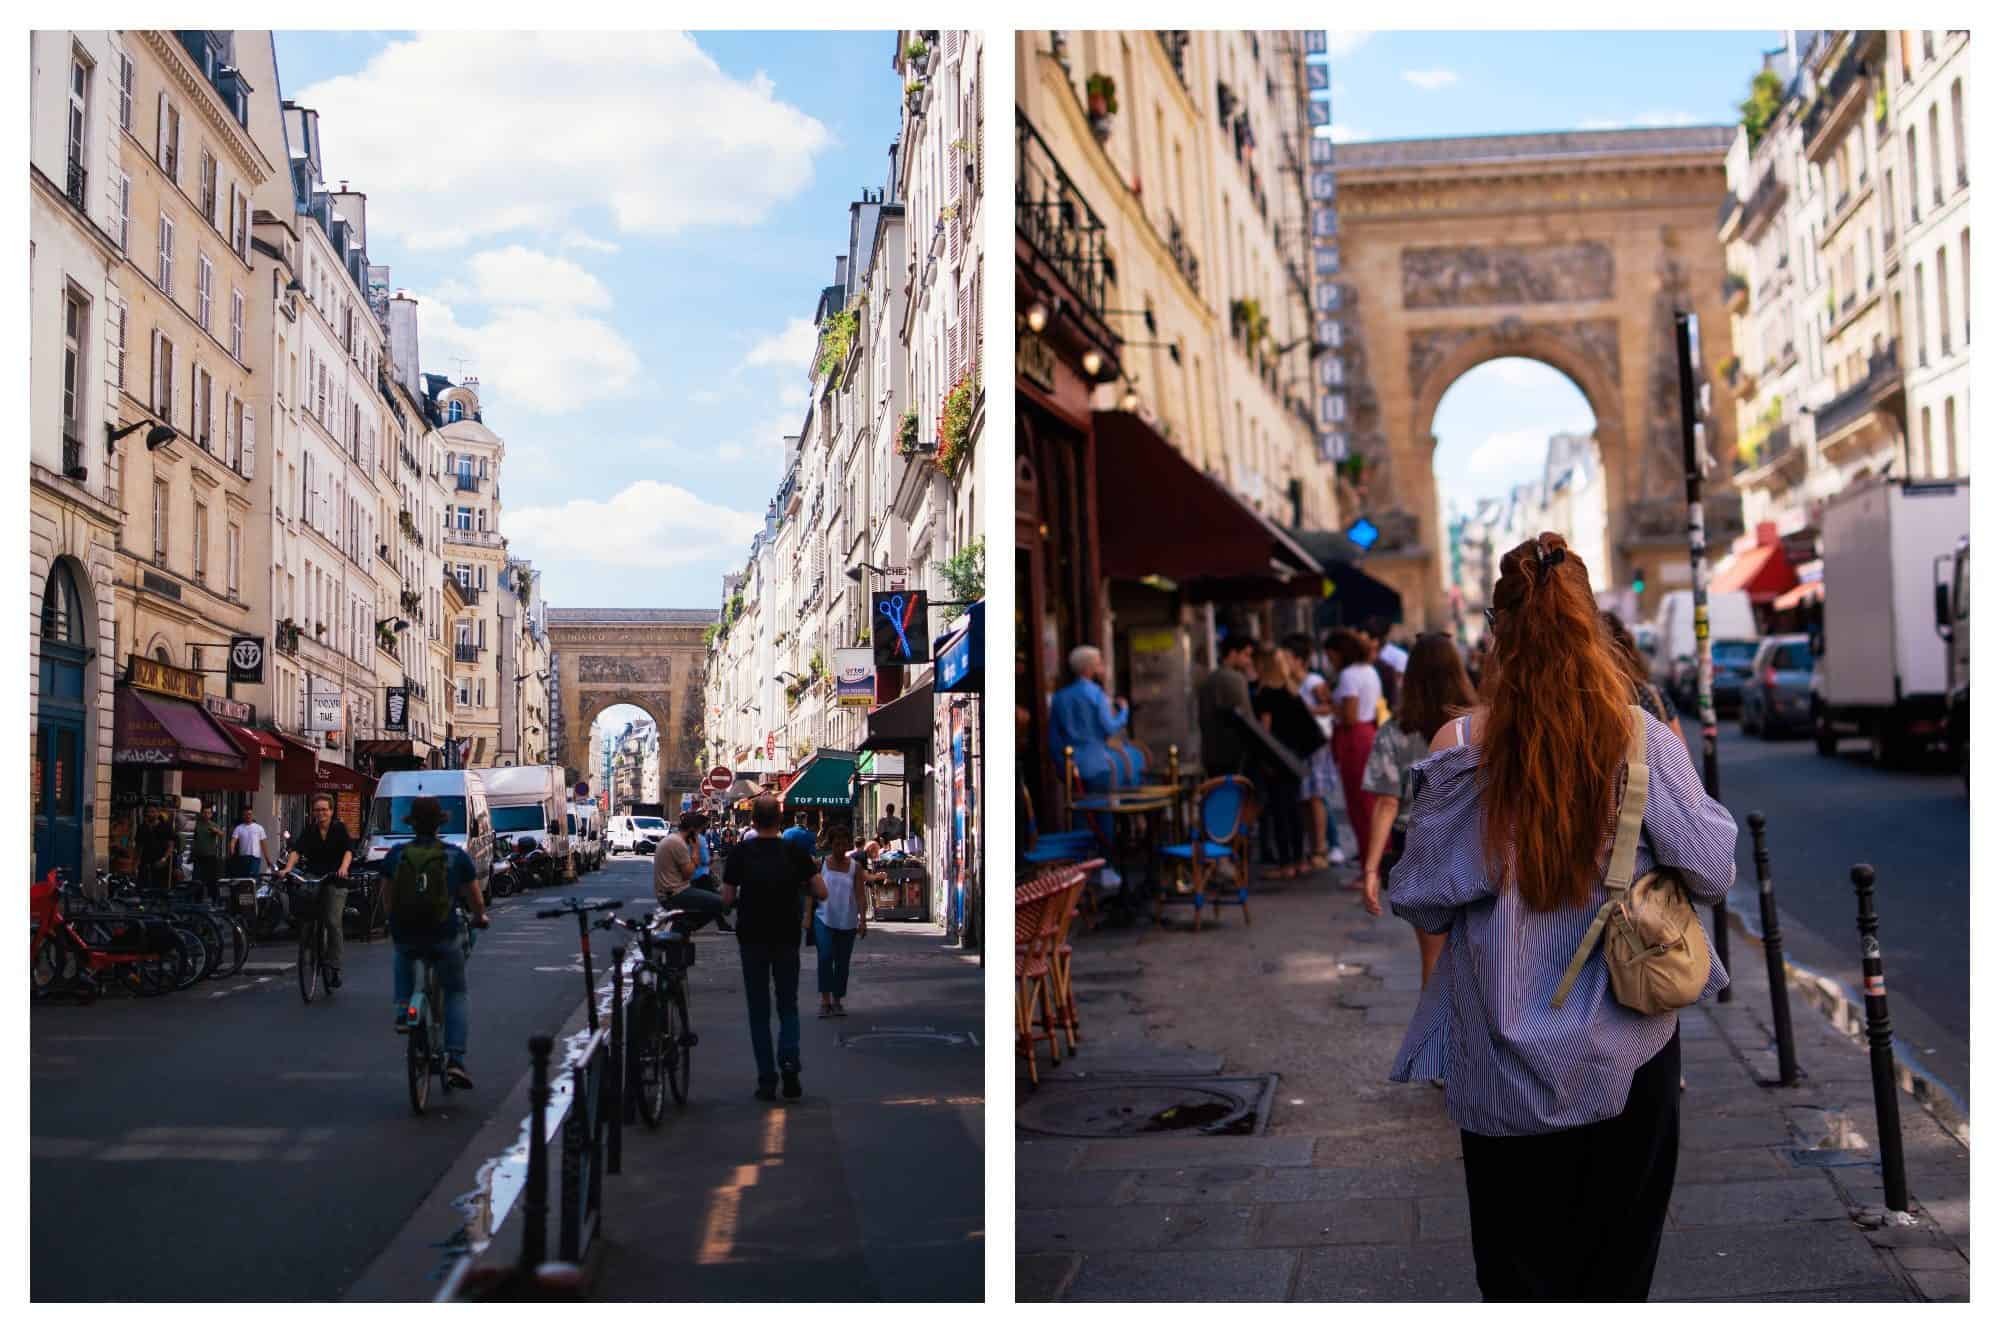 Street scene from the Faubourg Saint Denis (left) with the stone arch, formerly one of the doors of the city and a girl seen from the back with long red hair walking along the street (right).